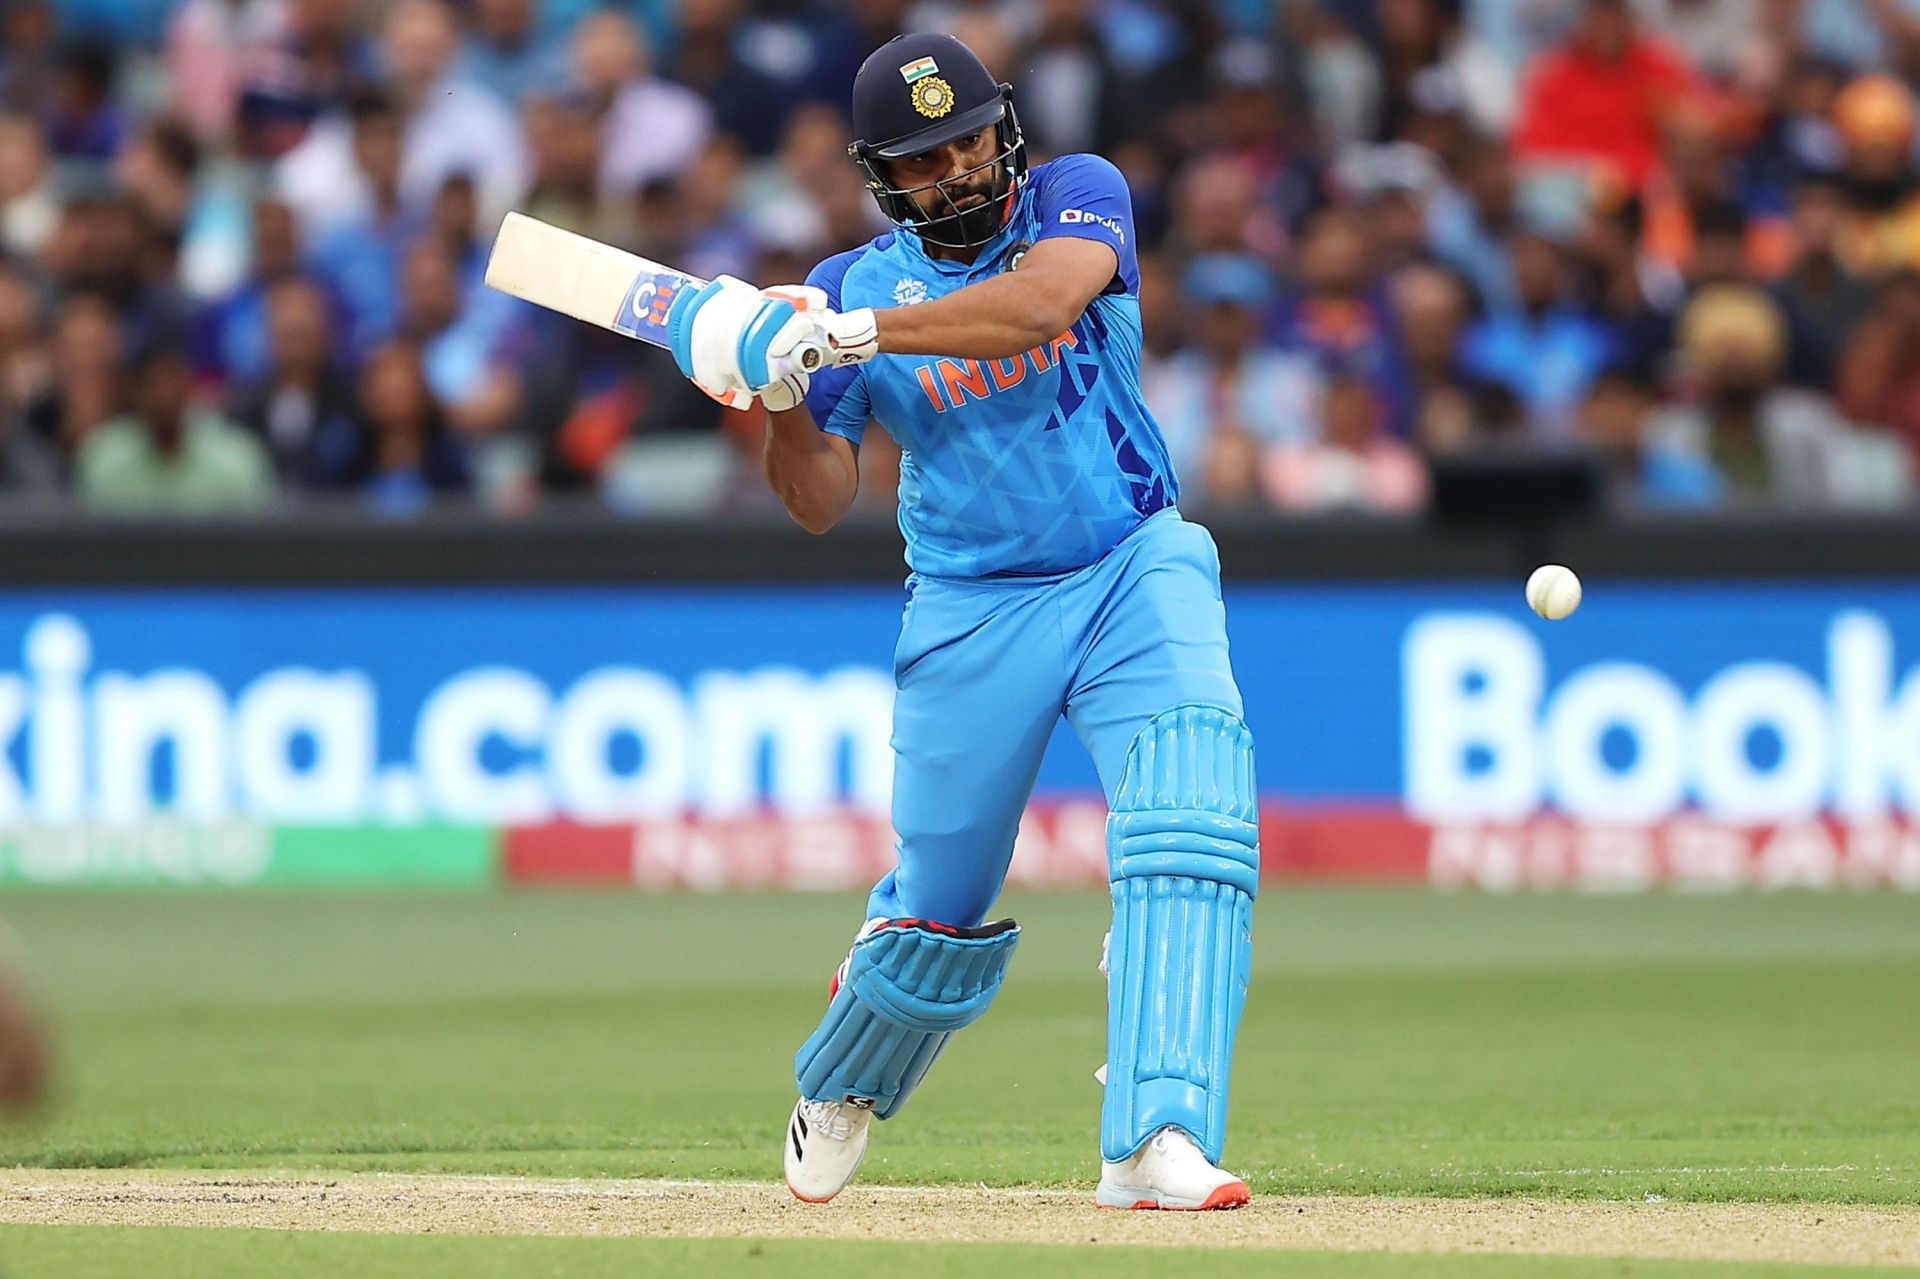 Rohit Sharma had a poor T20 World Cup by his standards.